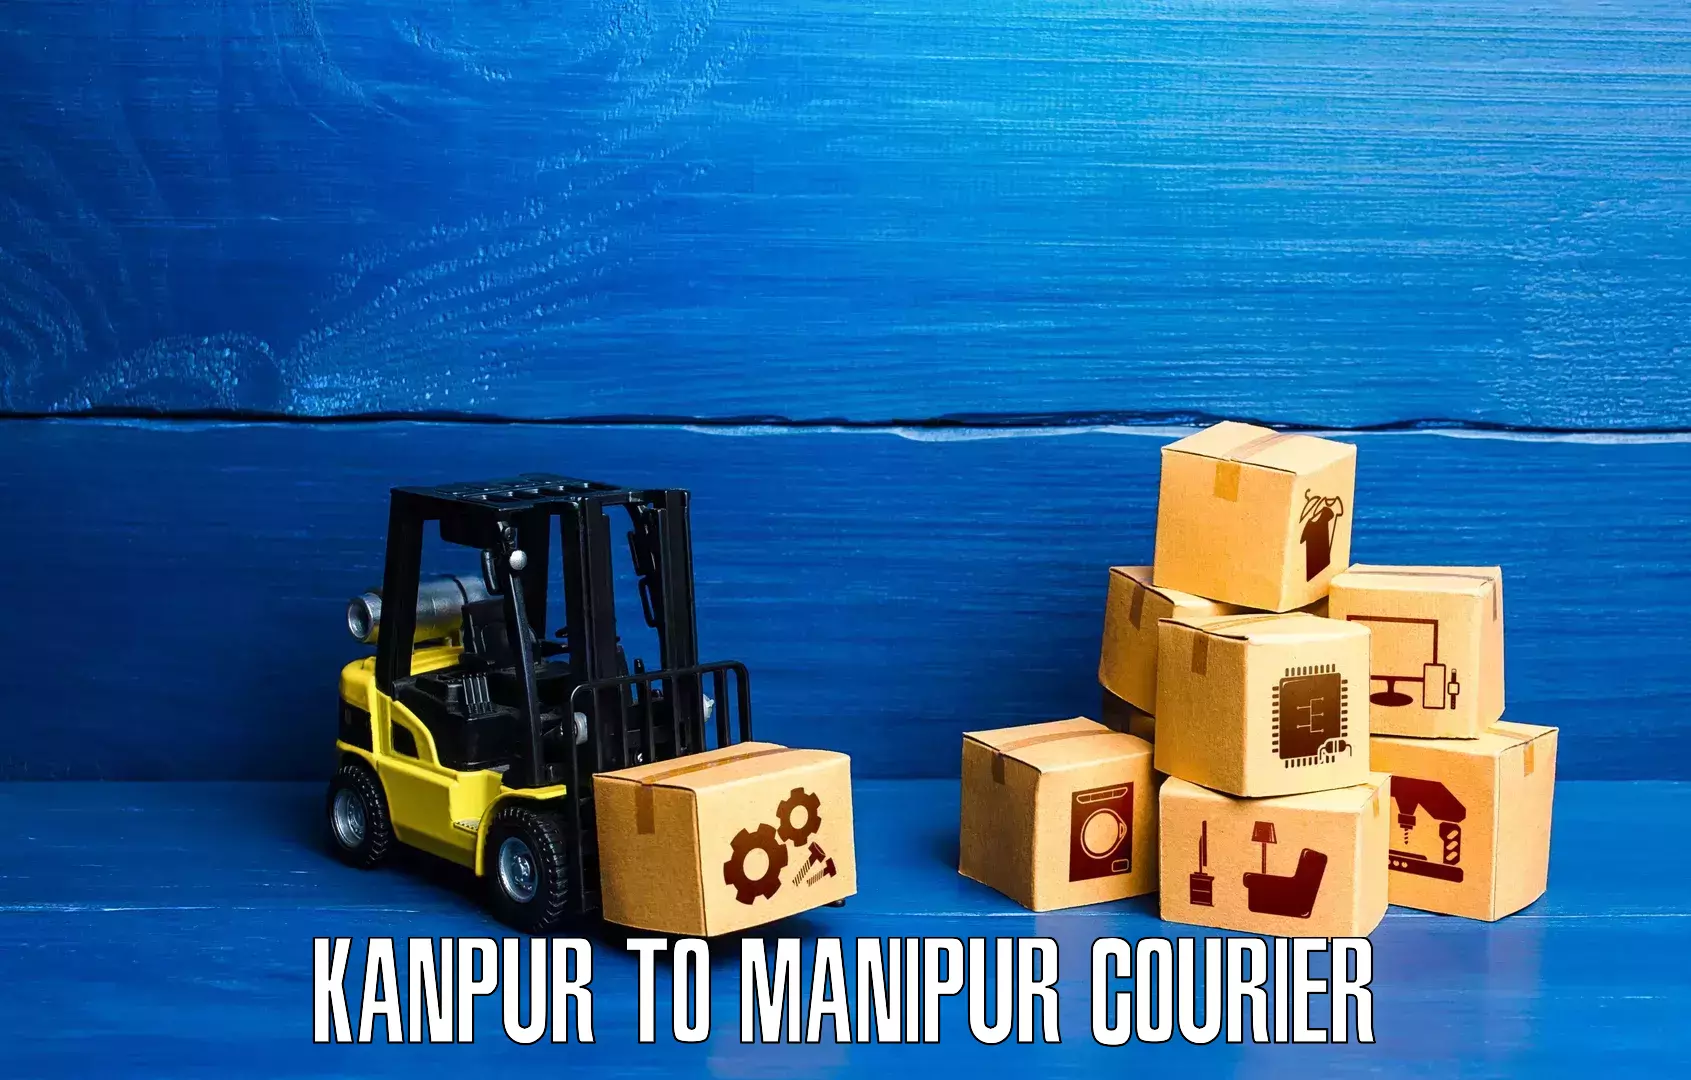 Comprehensive shipping network Kanpur to Chandel